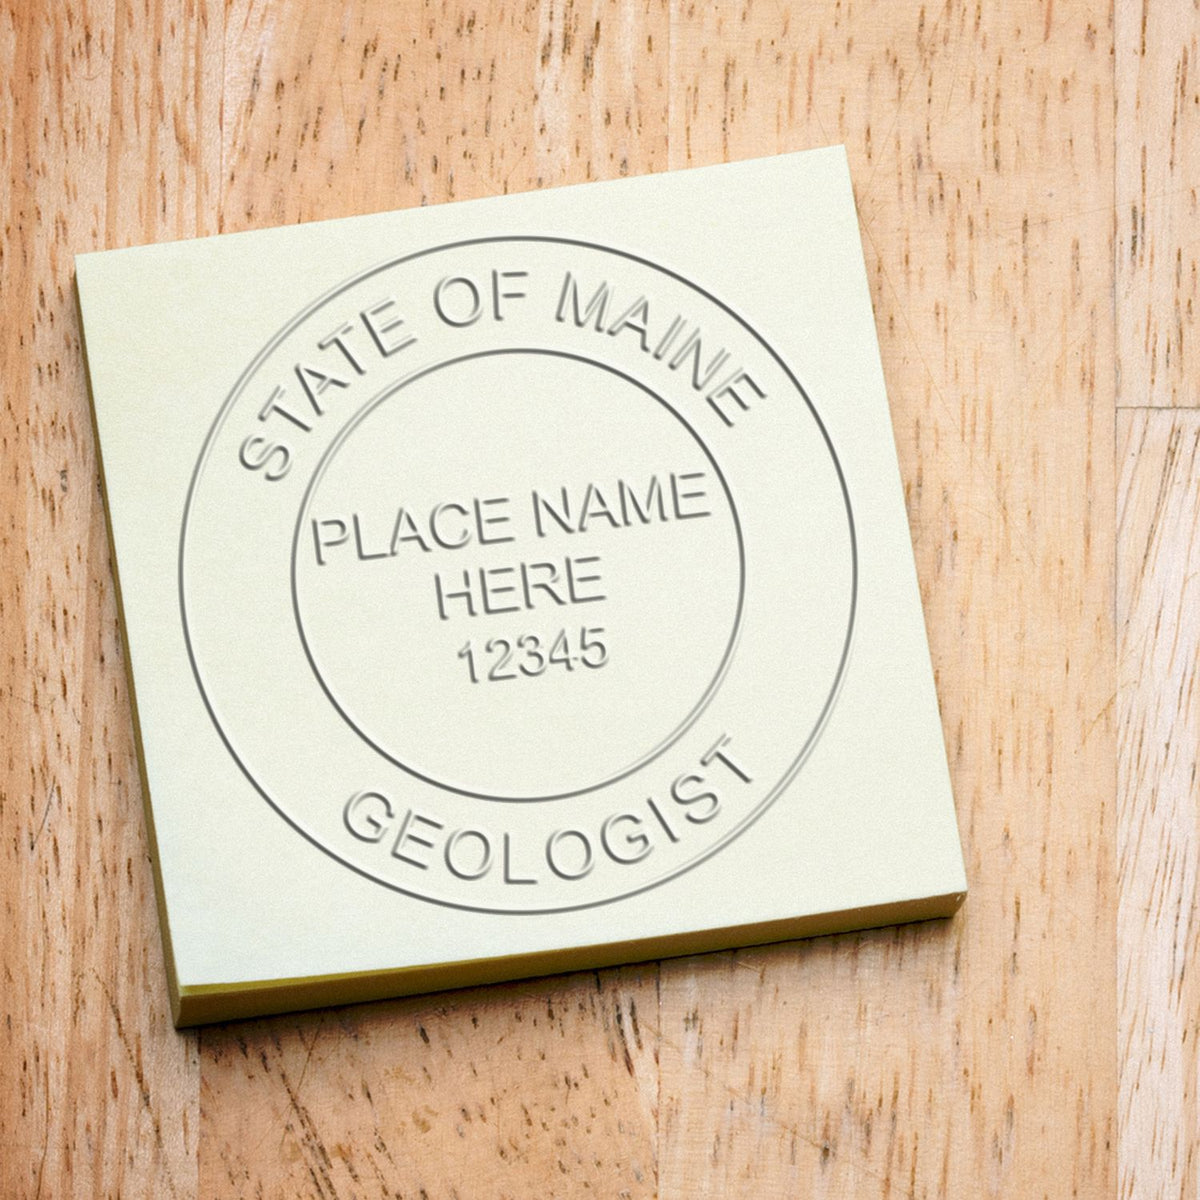 Another Example of a stamped impression of the Handheld Maine Professional Geologist Embosser on a office form